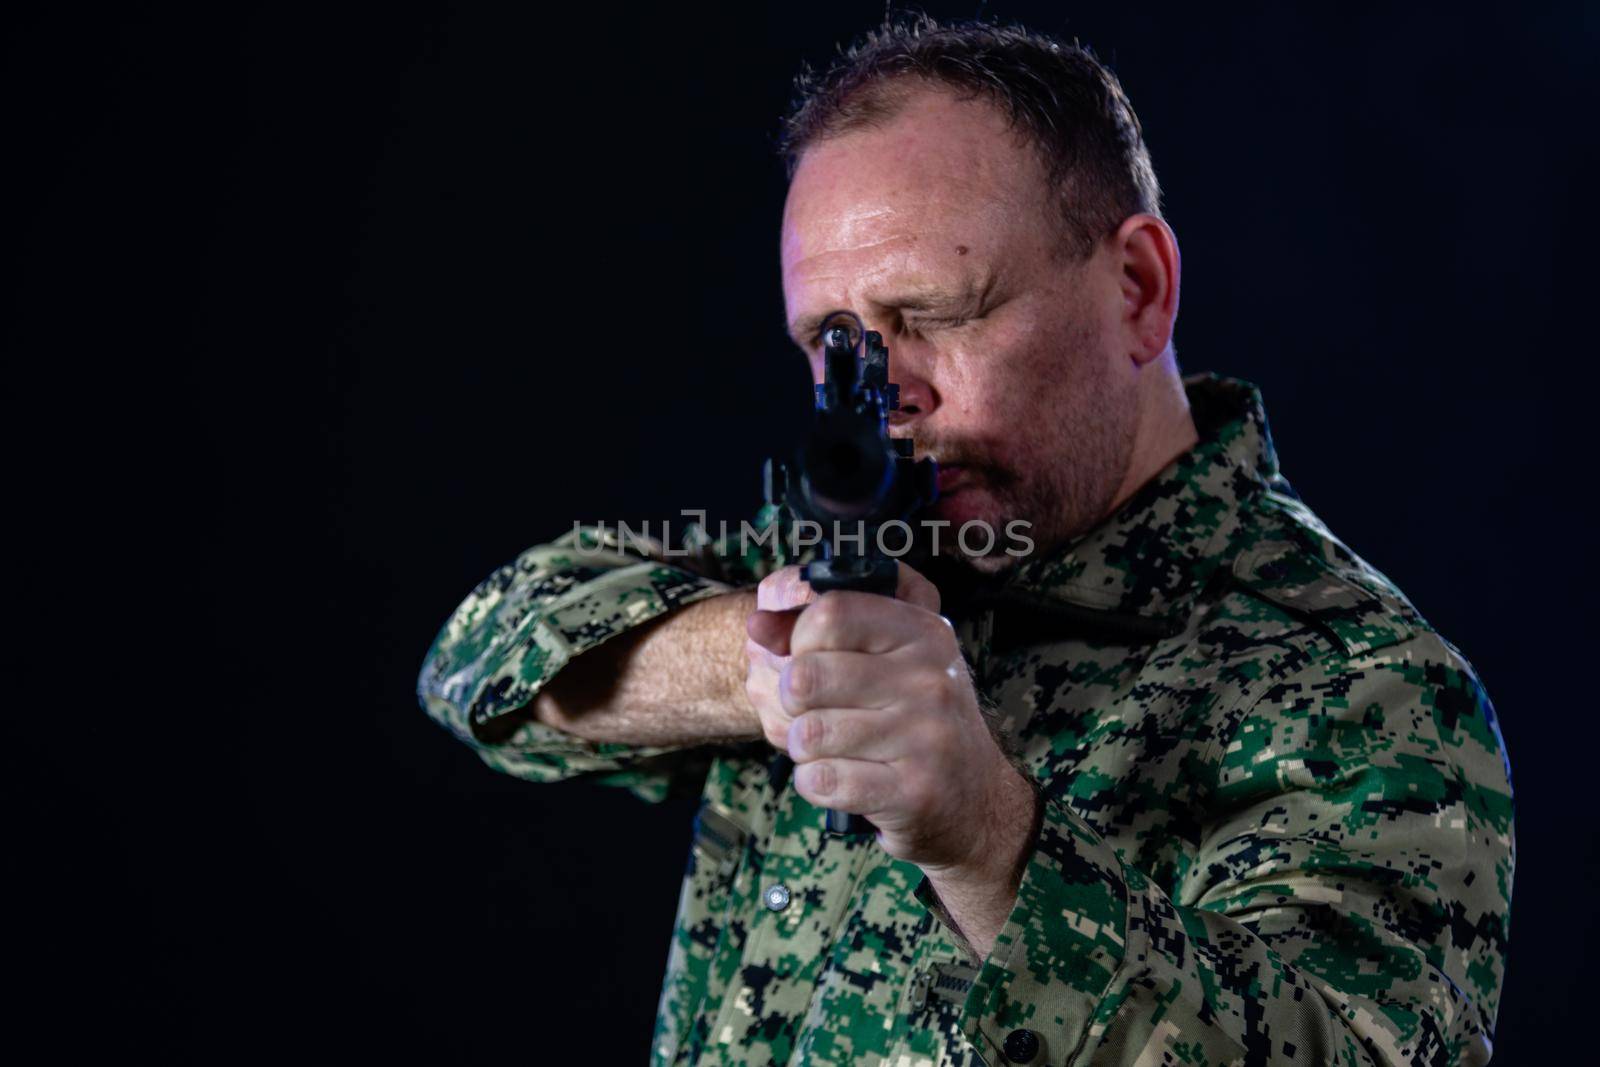 Soldier in army fatigues pointing assault rifle